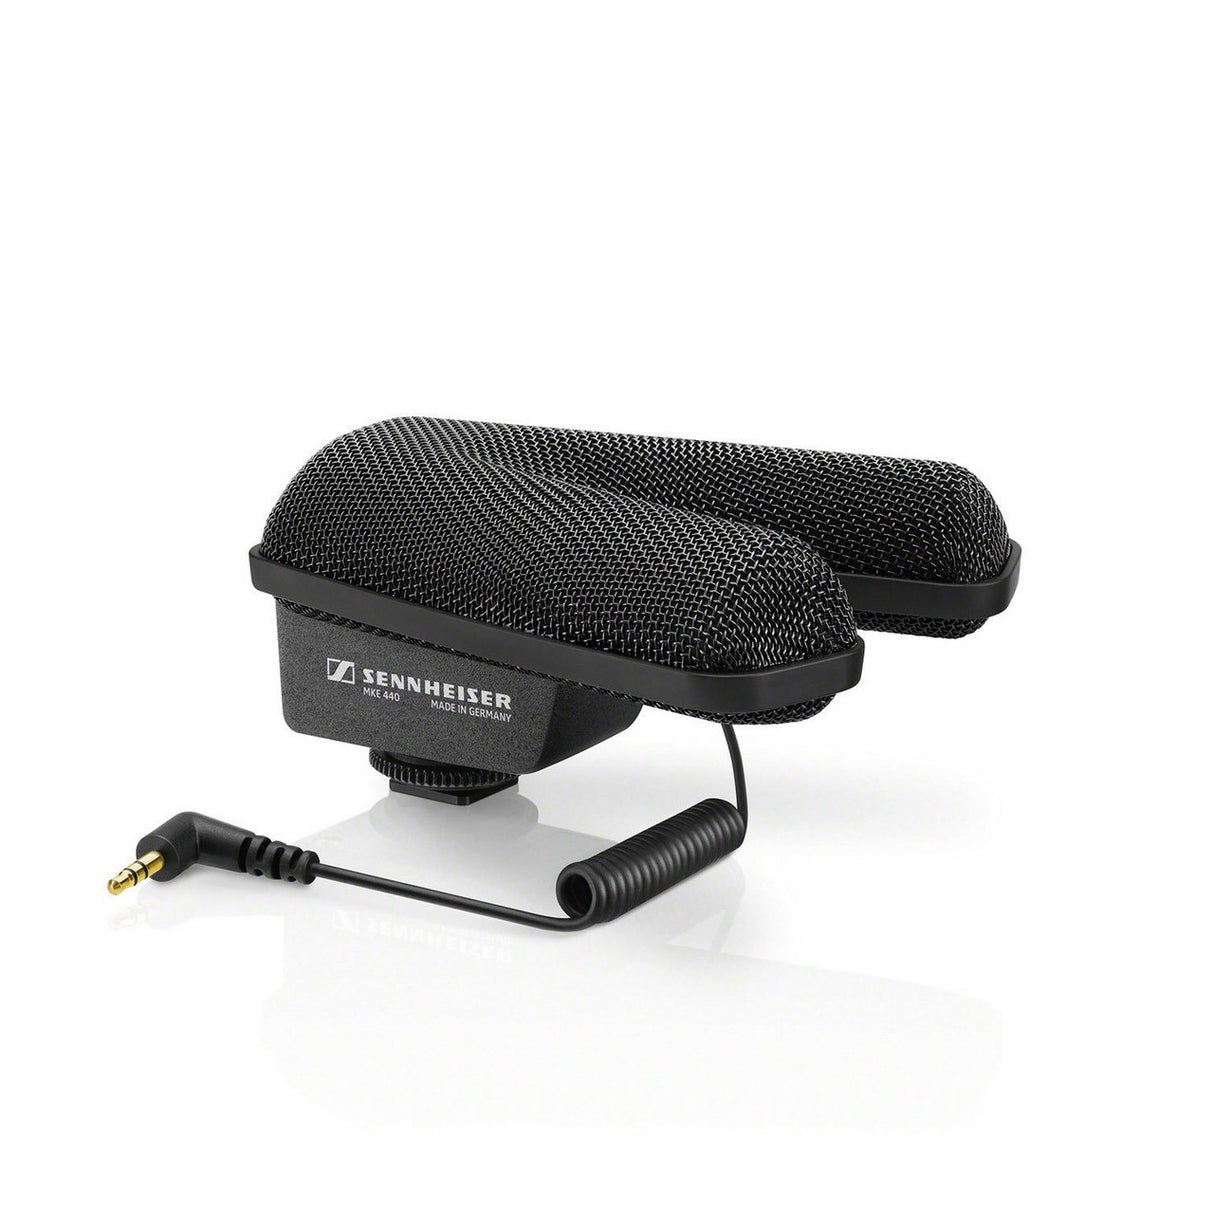 Sennheiser MKE 440 Stereo Shotgun Microphone for Cameras and Camcorders (Used)